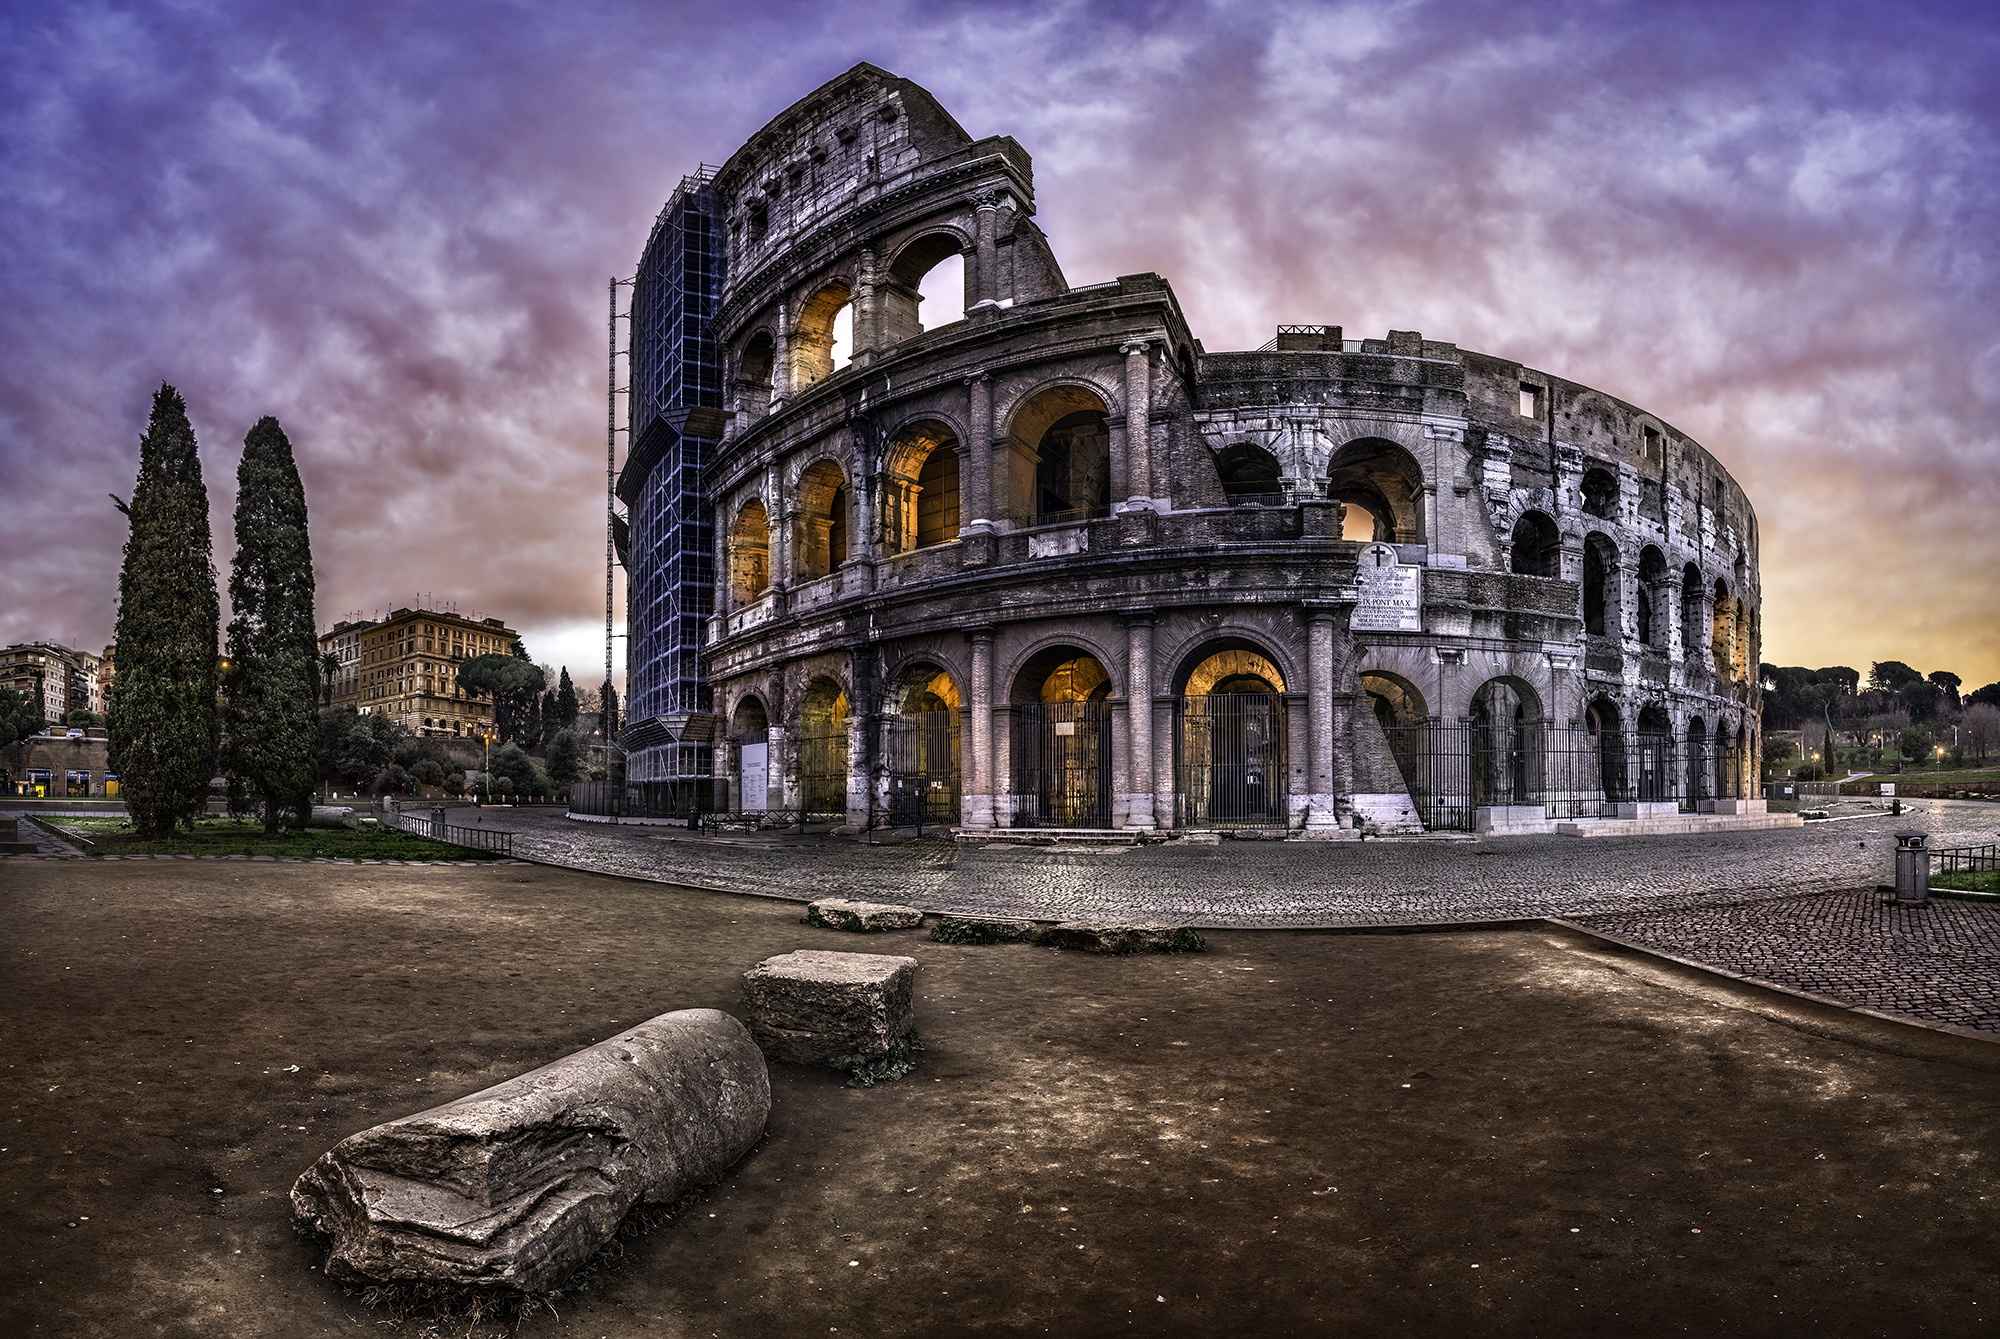 General 2000x1339 Rome city ancient history Colosseum architecture landmark Italy Europe World Heritage Site